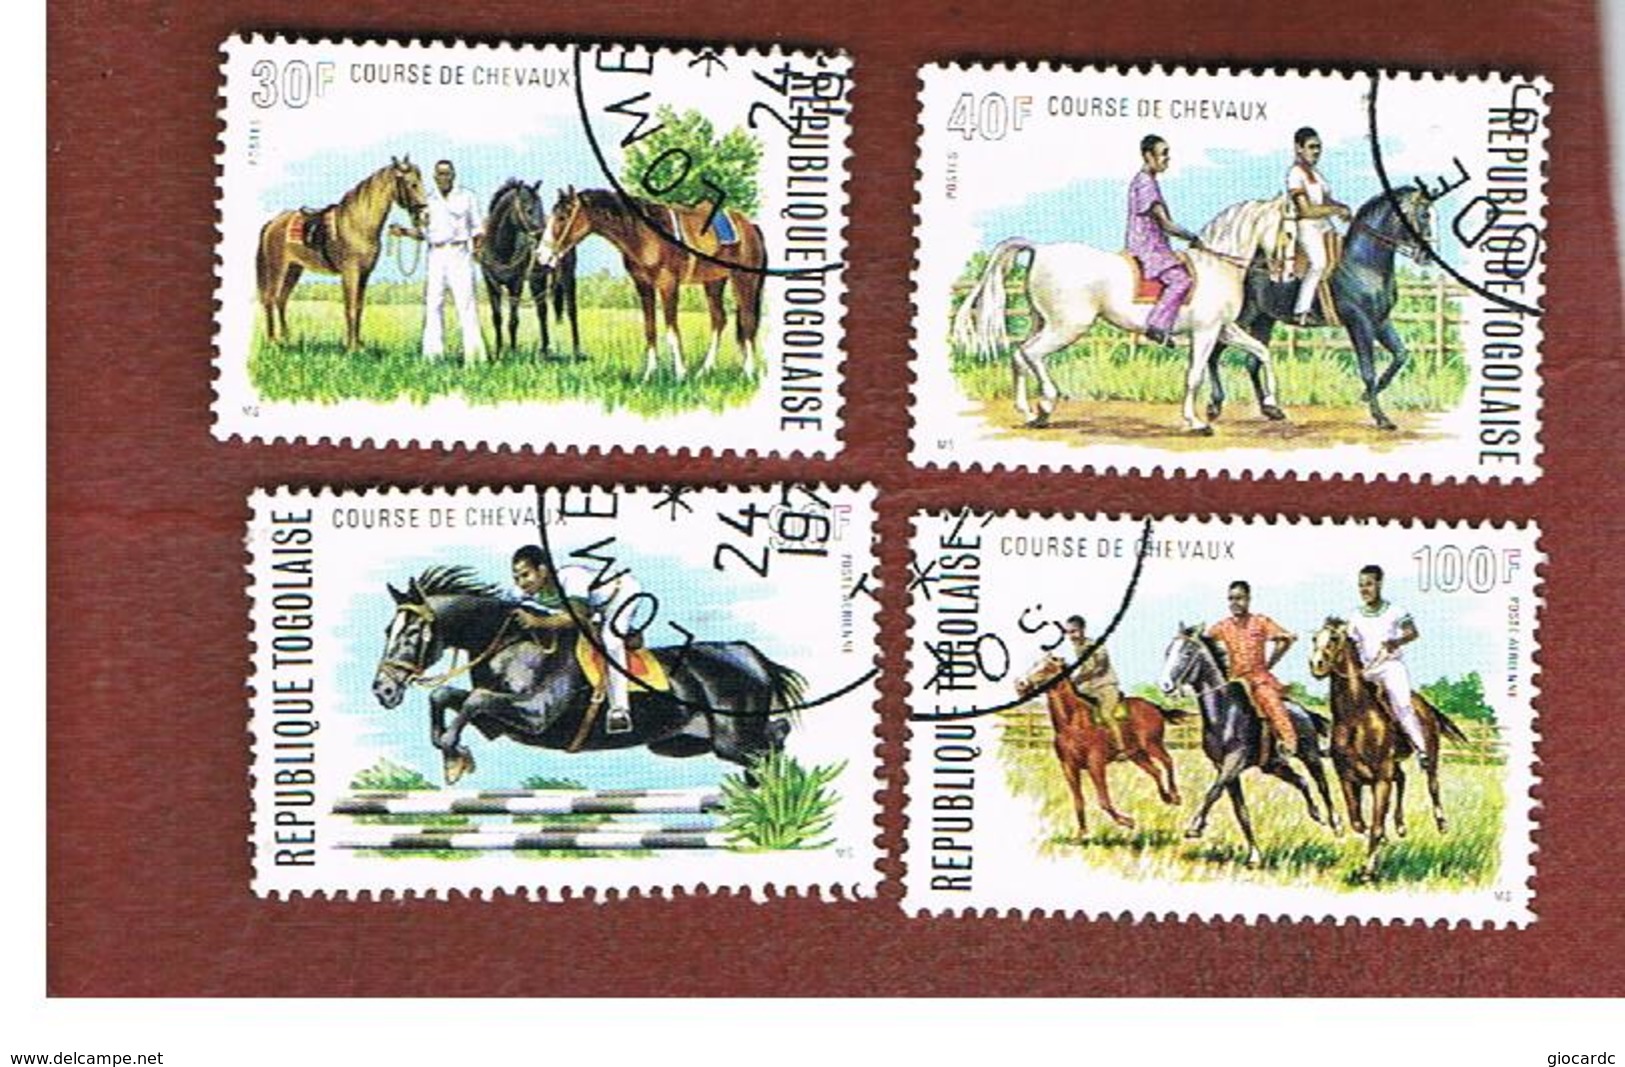 TOGO  - SG 1028.1031  -   1974  HORSE RACING (COMPLET SET OF 4)  - USED ° - Togo (1960-...)